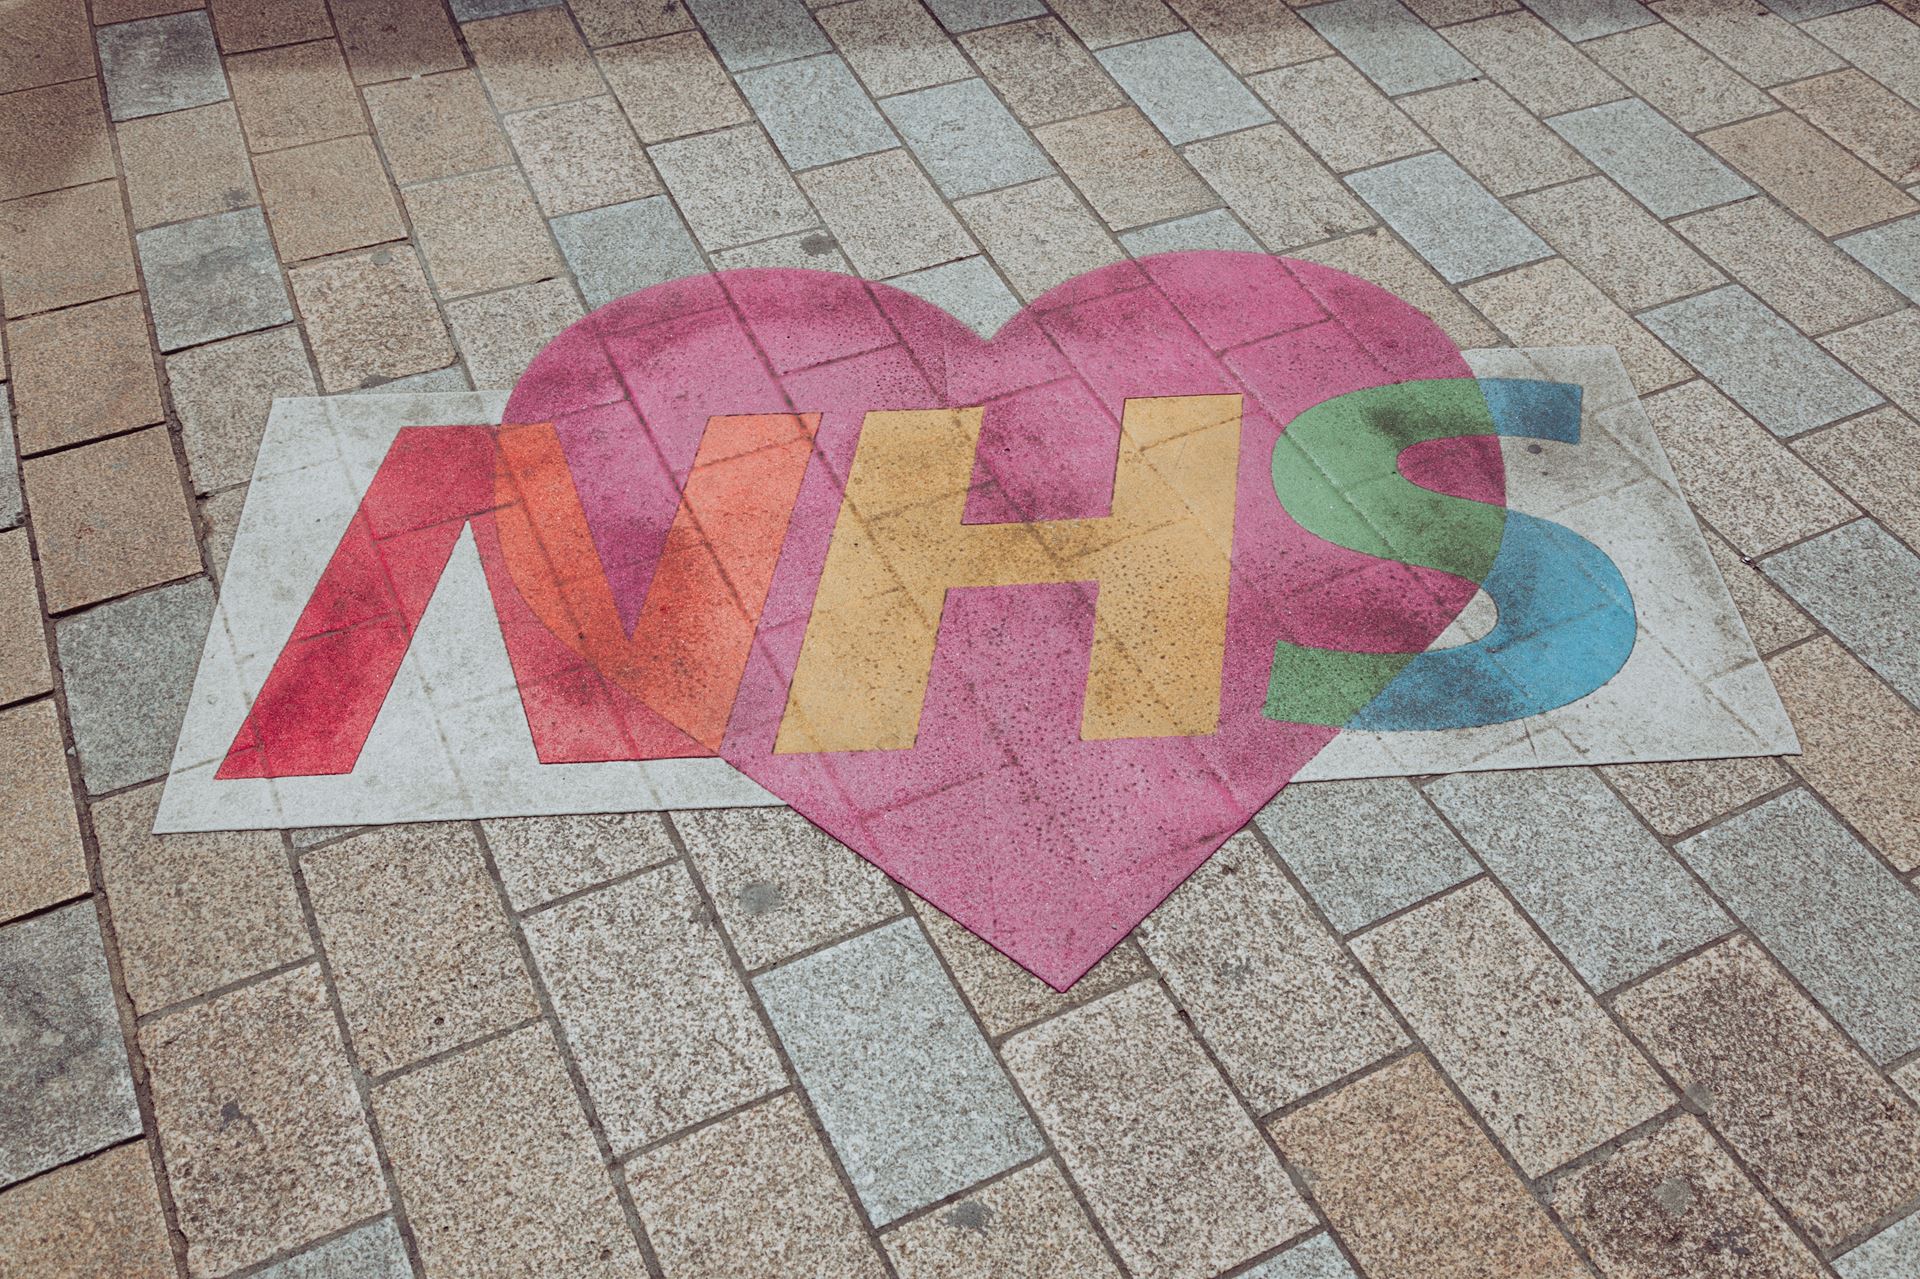 The NHS logo over an image of a heart, printed on a pavement